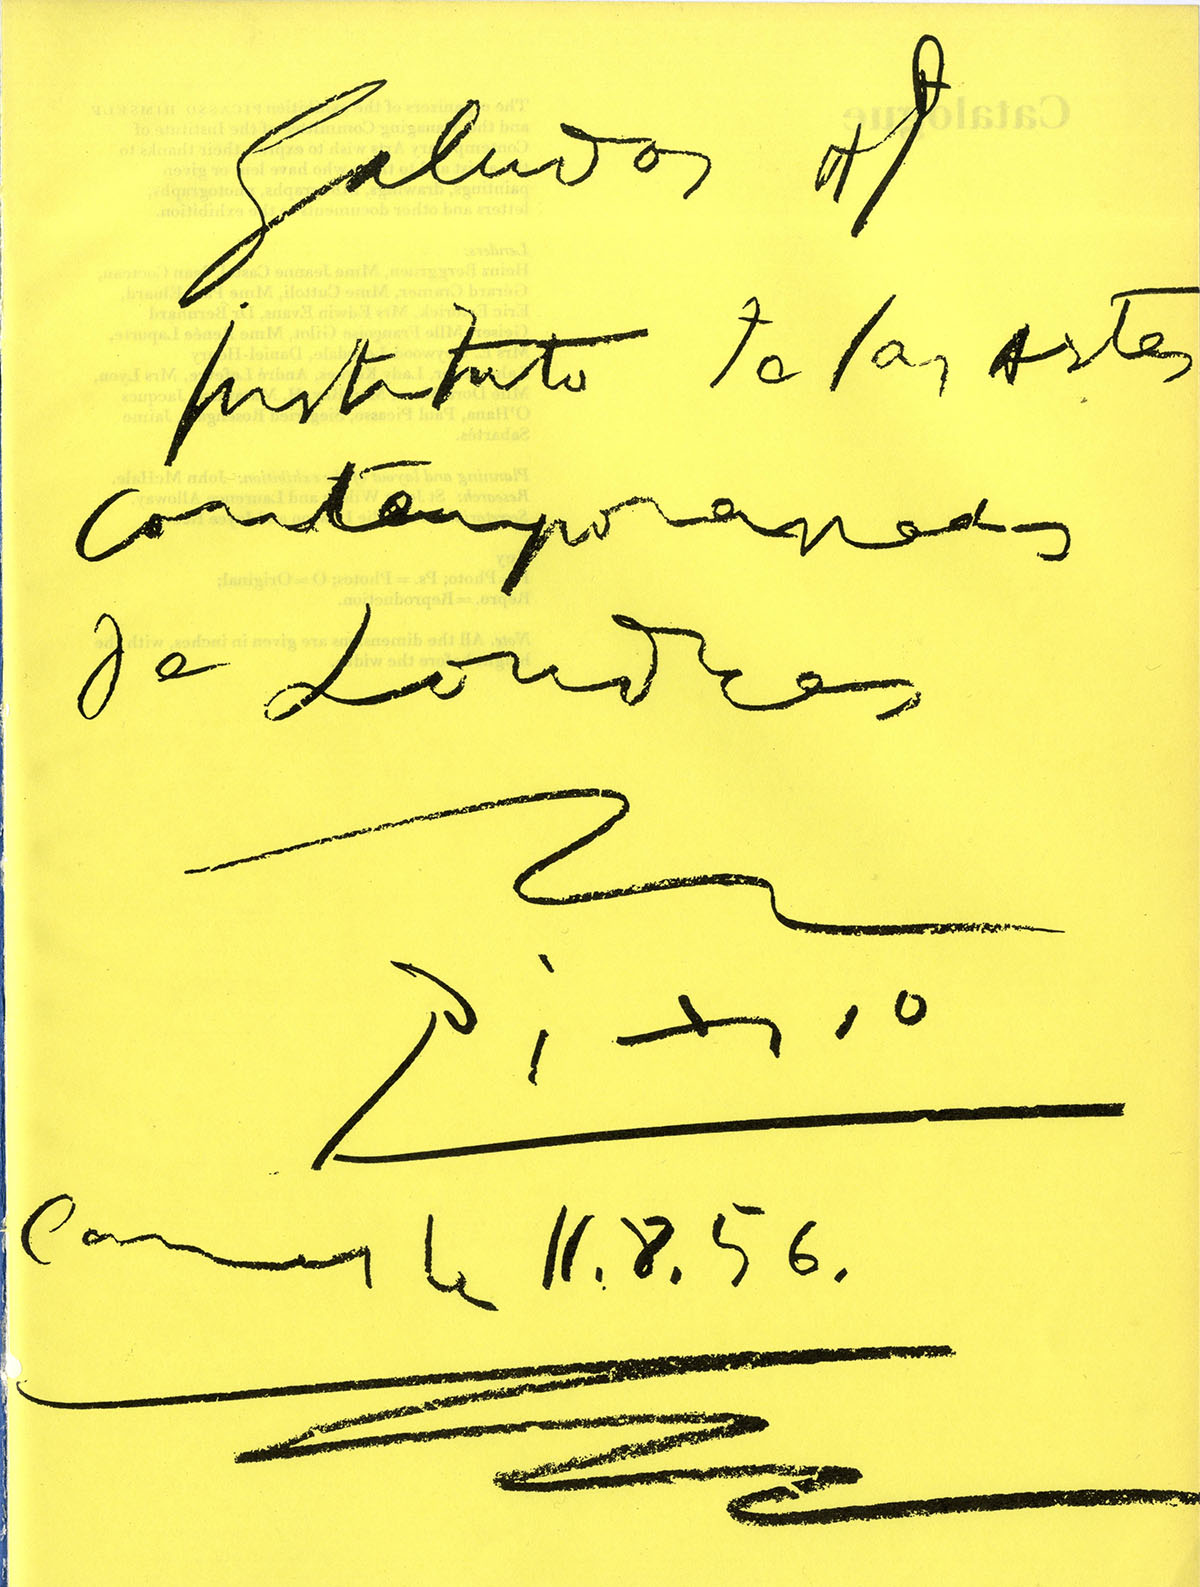 A written dedication to the ICA by Picasso from 1956